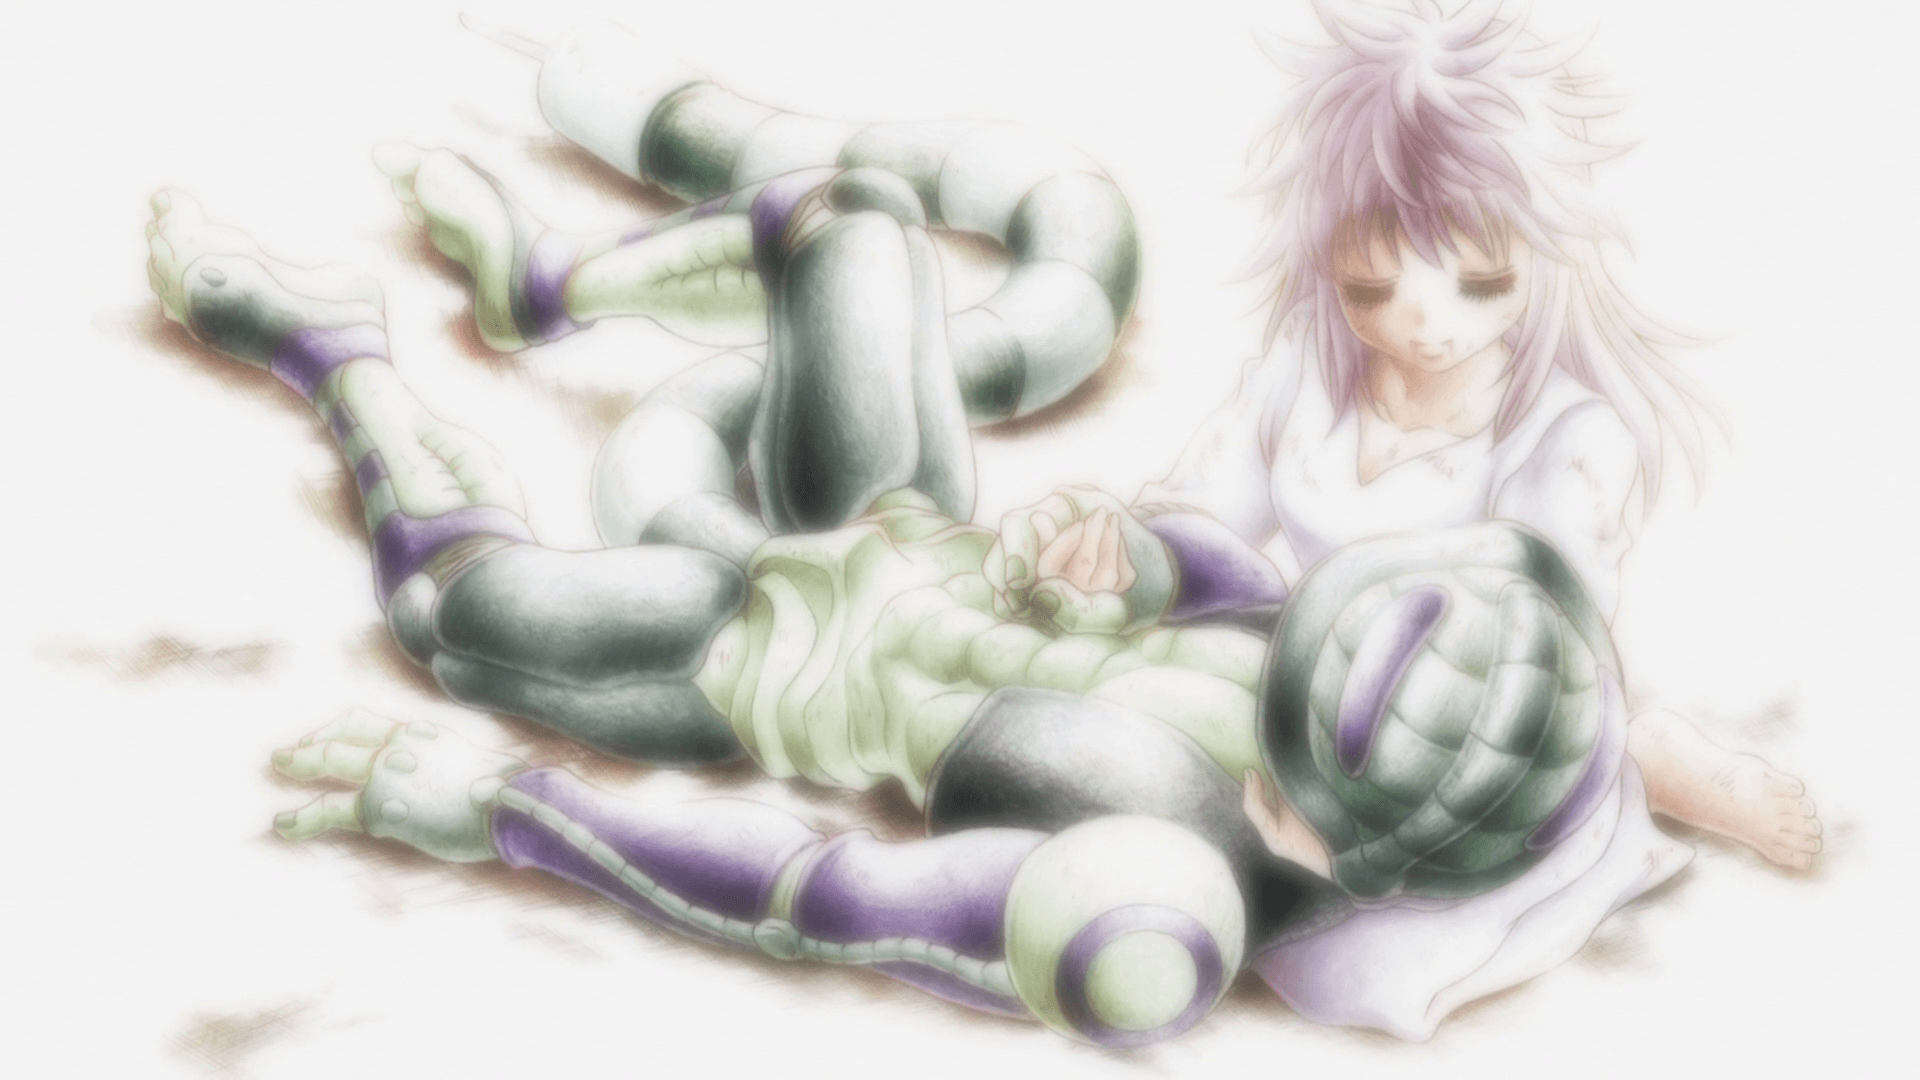 Komugi image Meruem's death HD wallpapers and backgrounds photos.